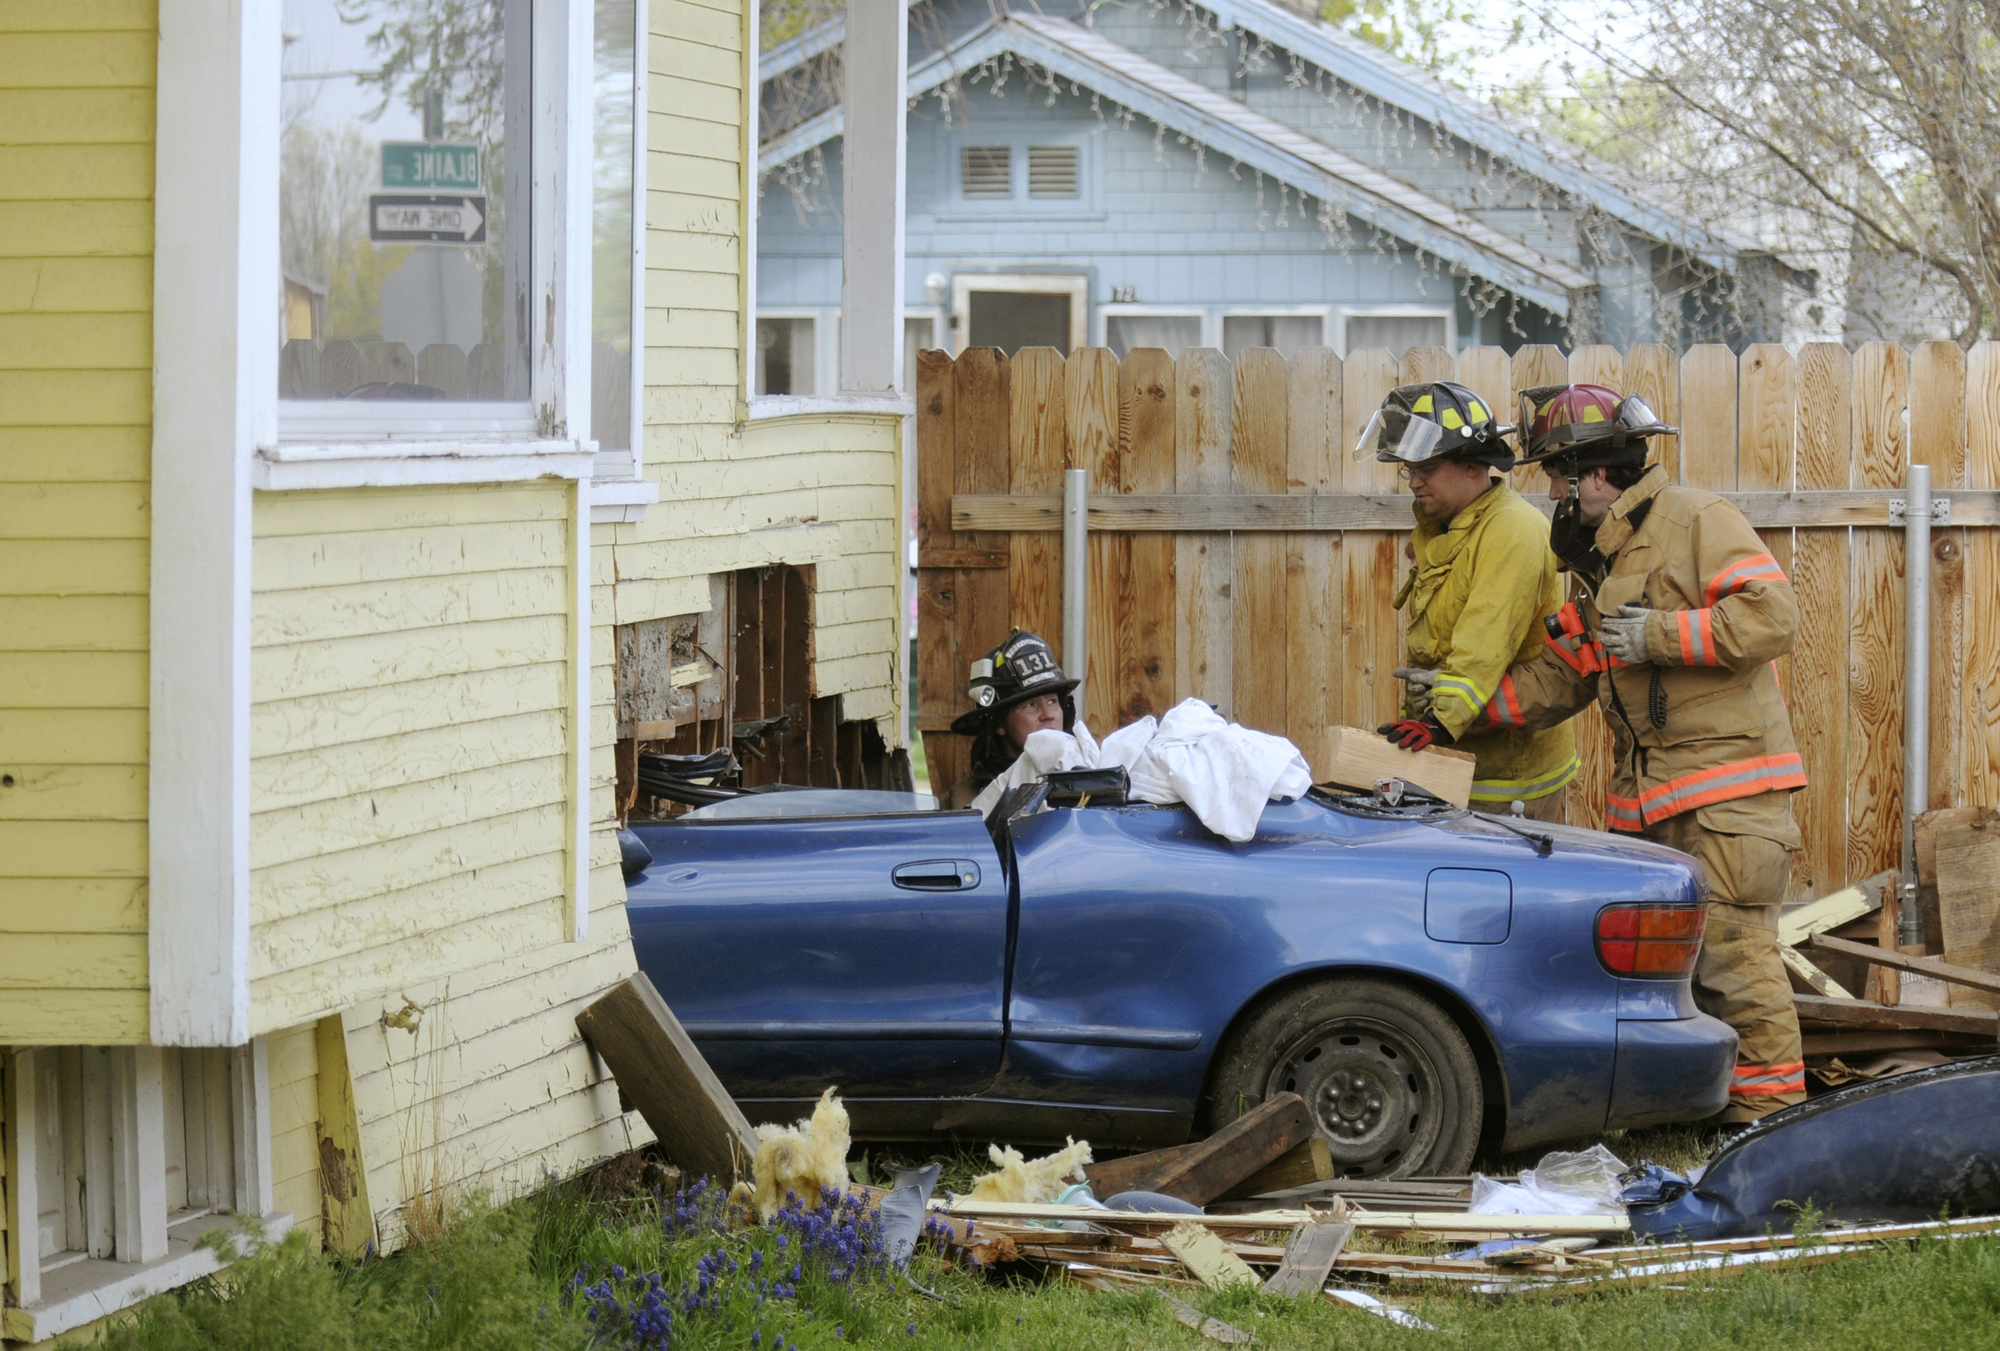 Car crashes into house in Idaho with firefighters